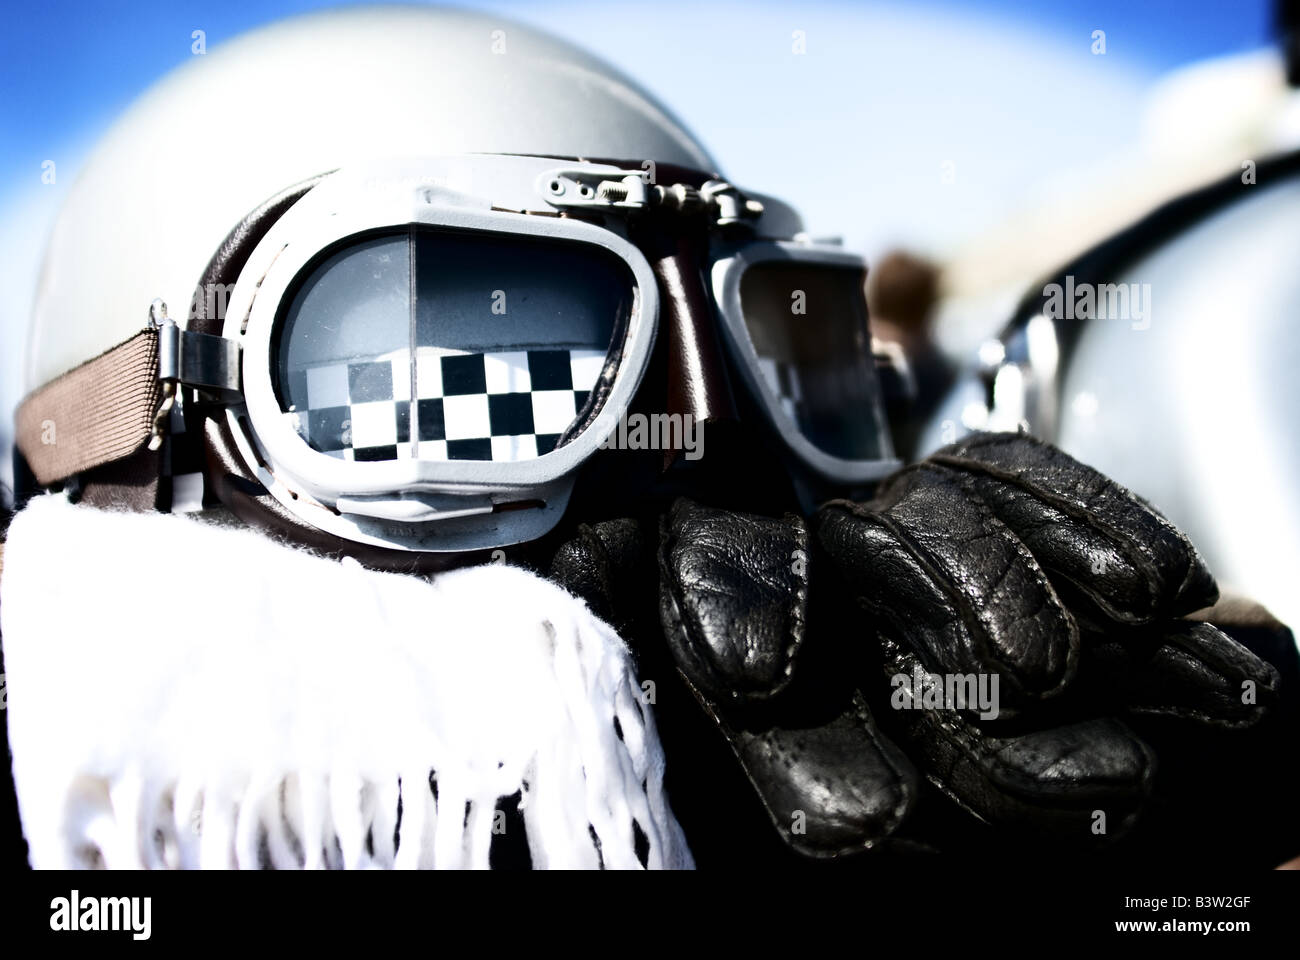 Vintage retro motorcycle helmet, goggles, gloves and scarf Stock Photo